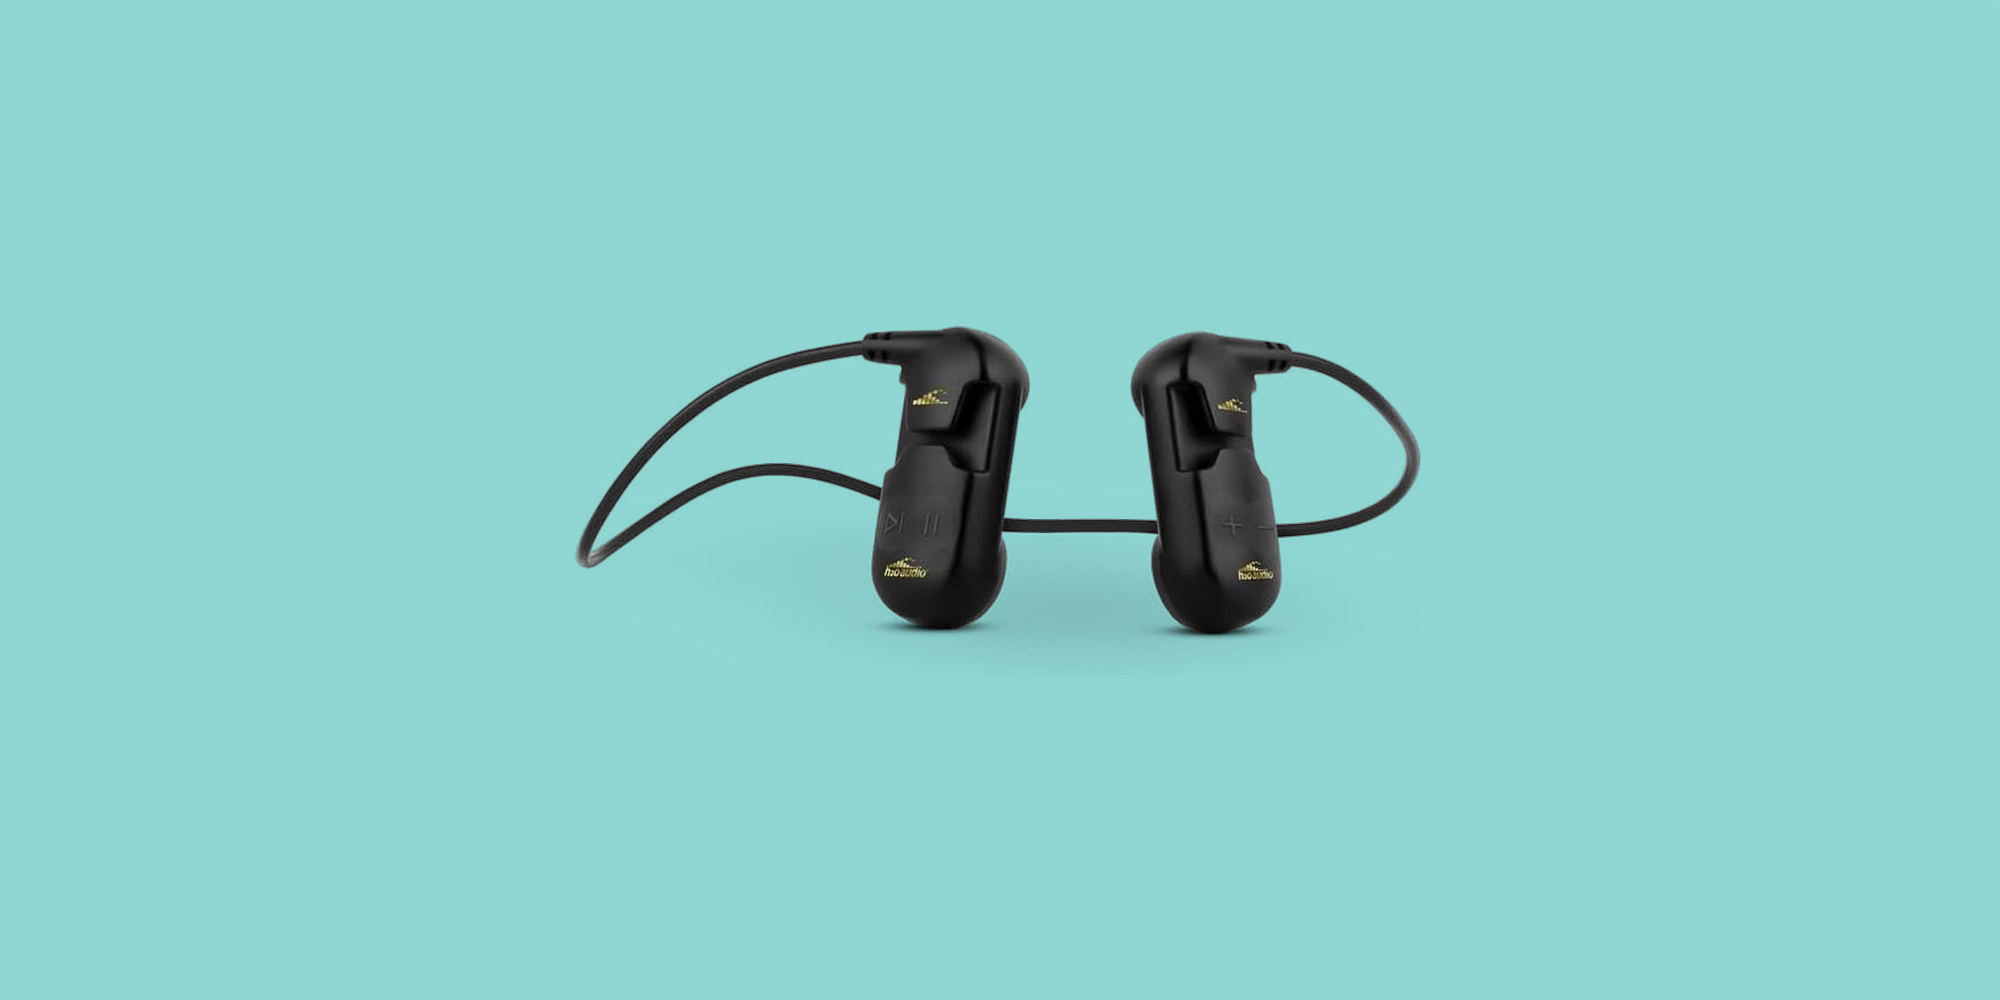 The Best Waterproof Earbuds for Rainy Walks and Jogs